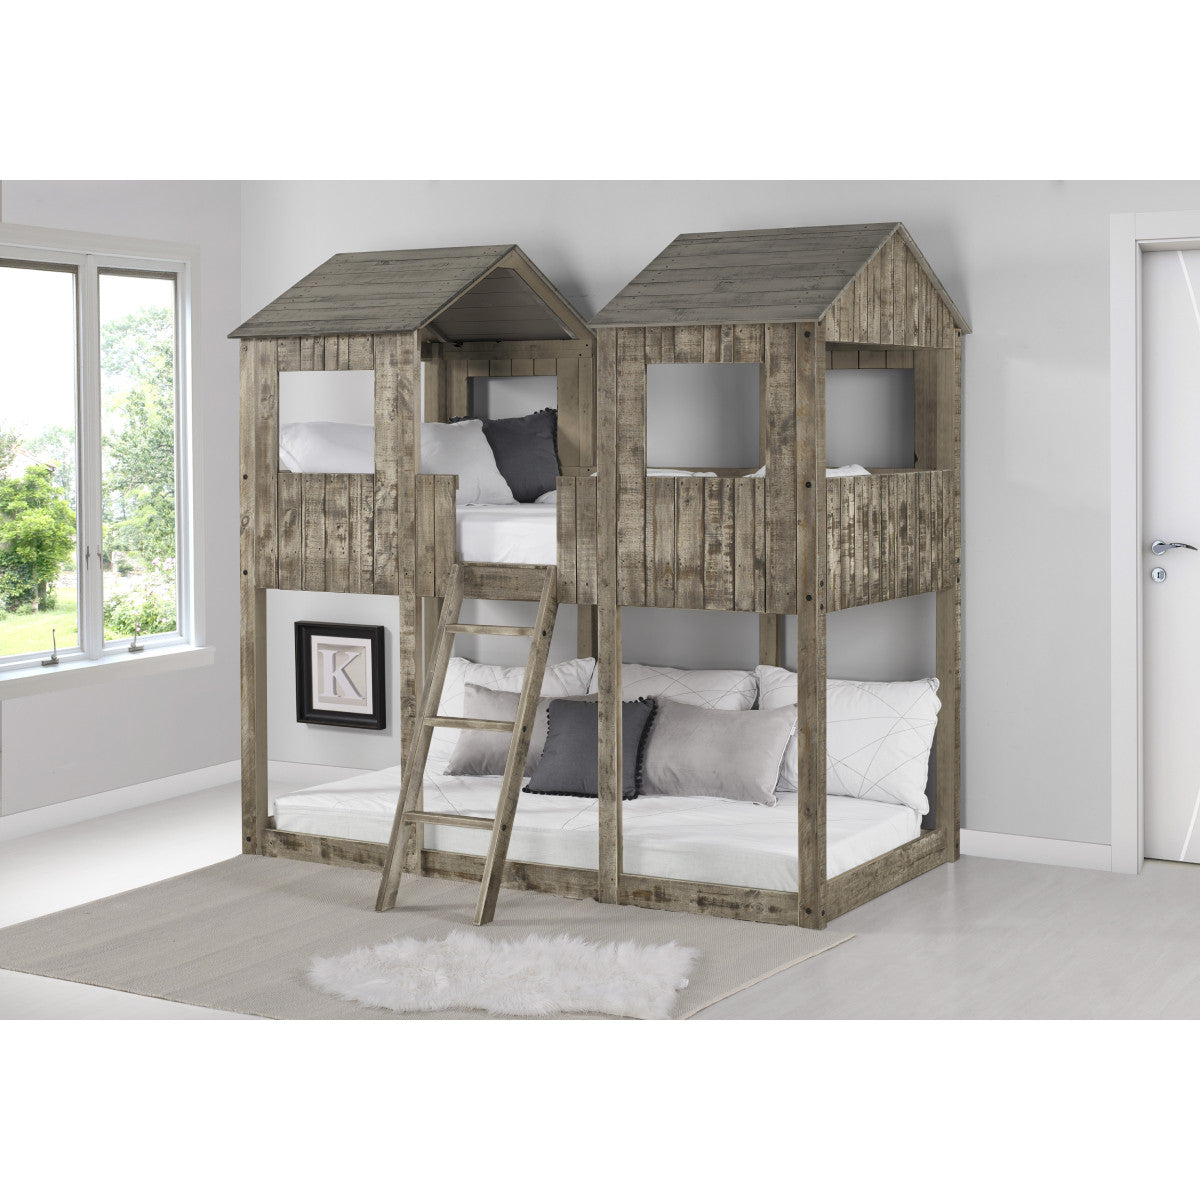 T/T TOWER BUNKBED RUSTIC DIRTY WHITE